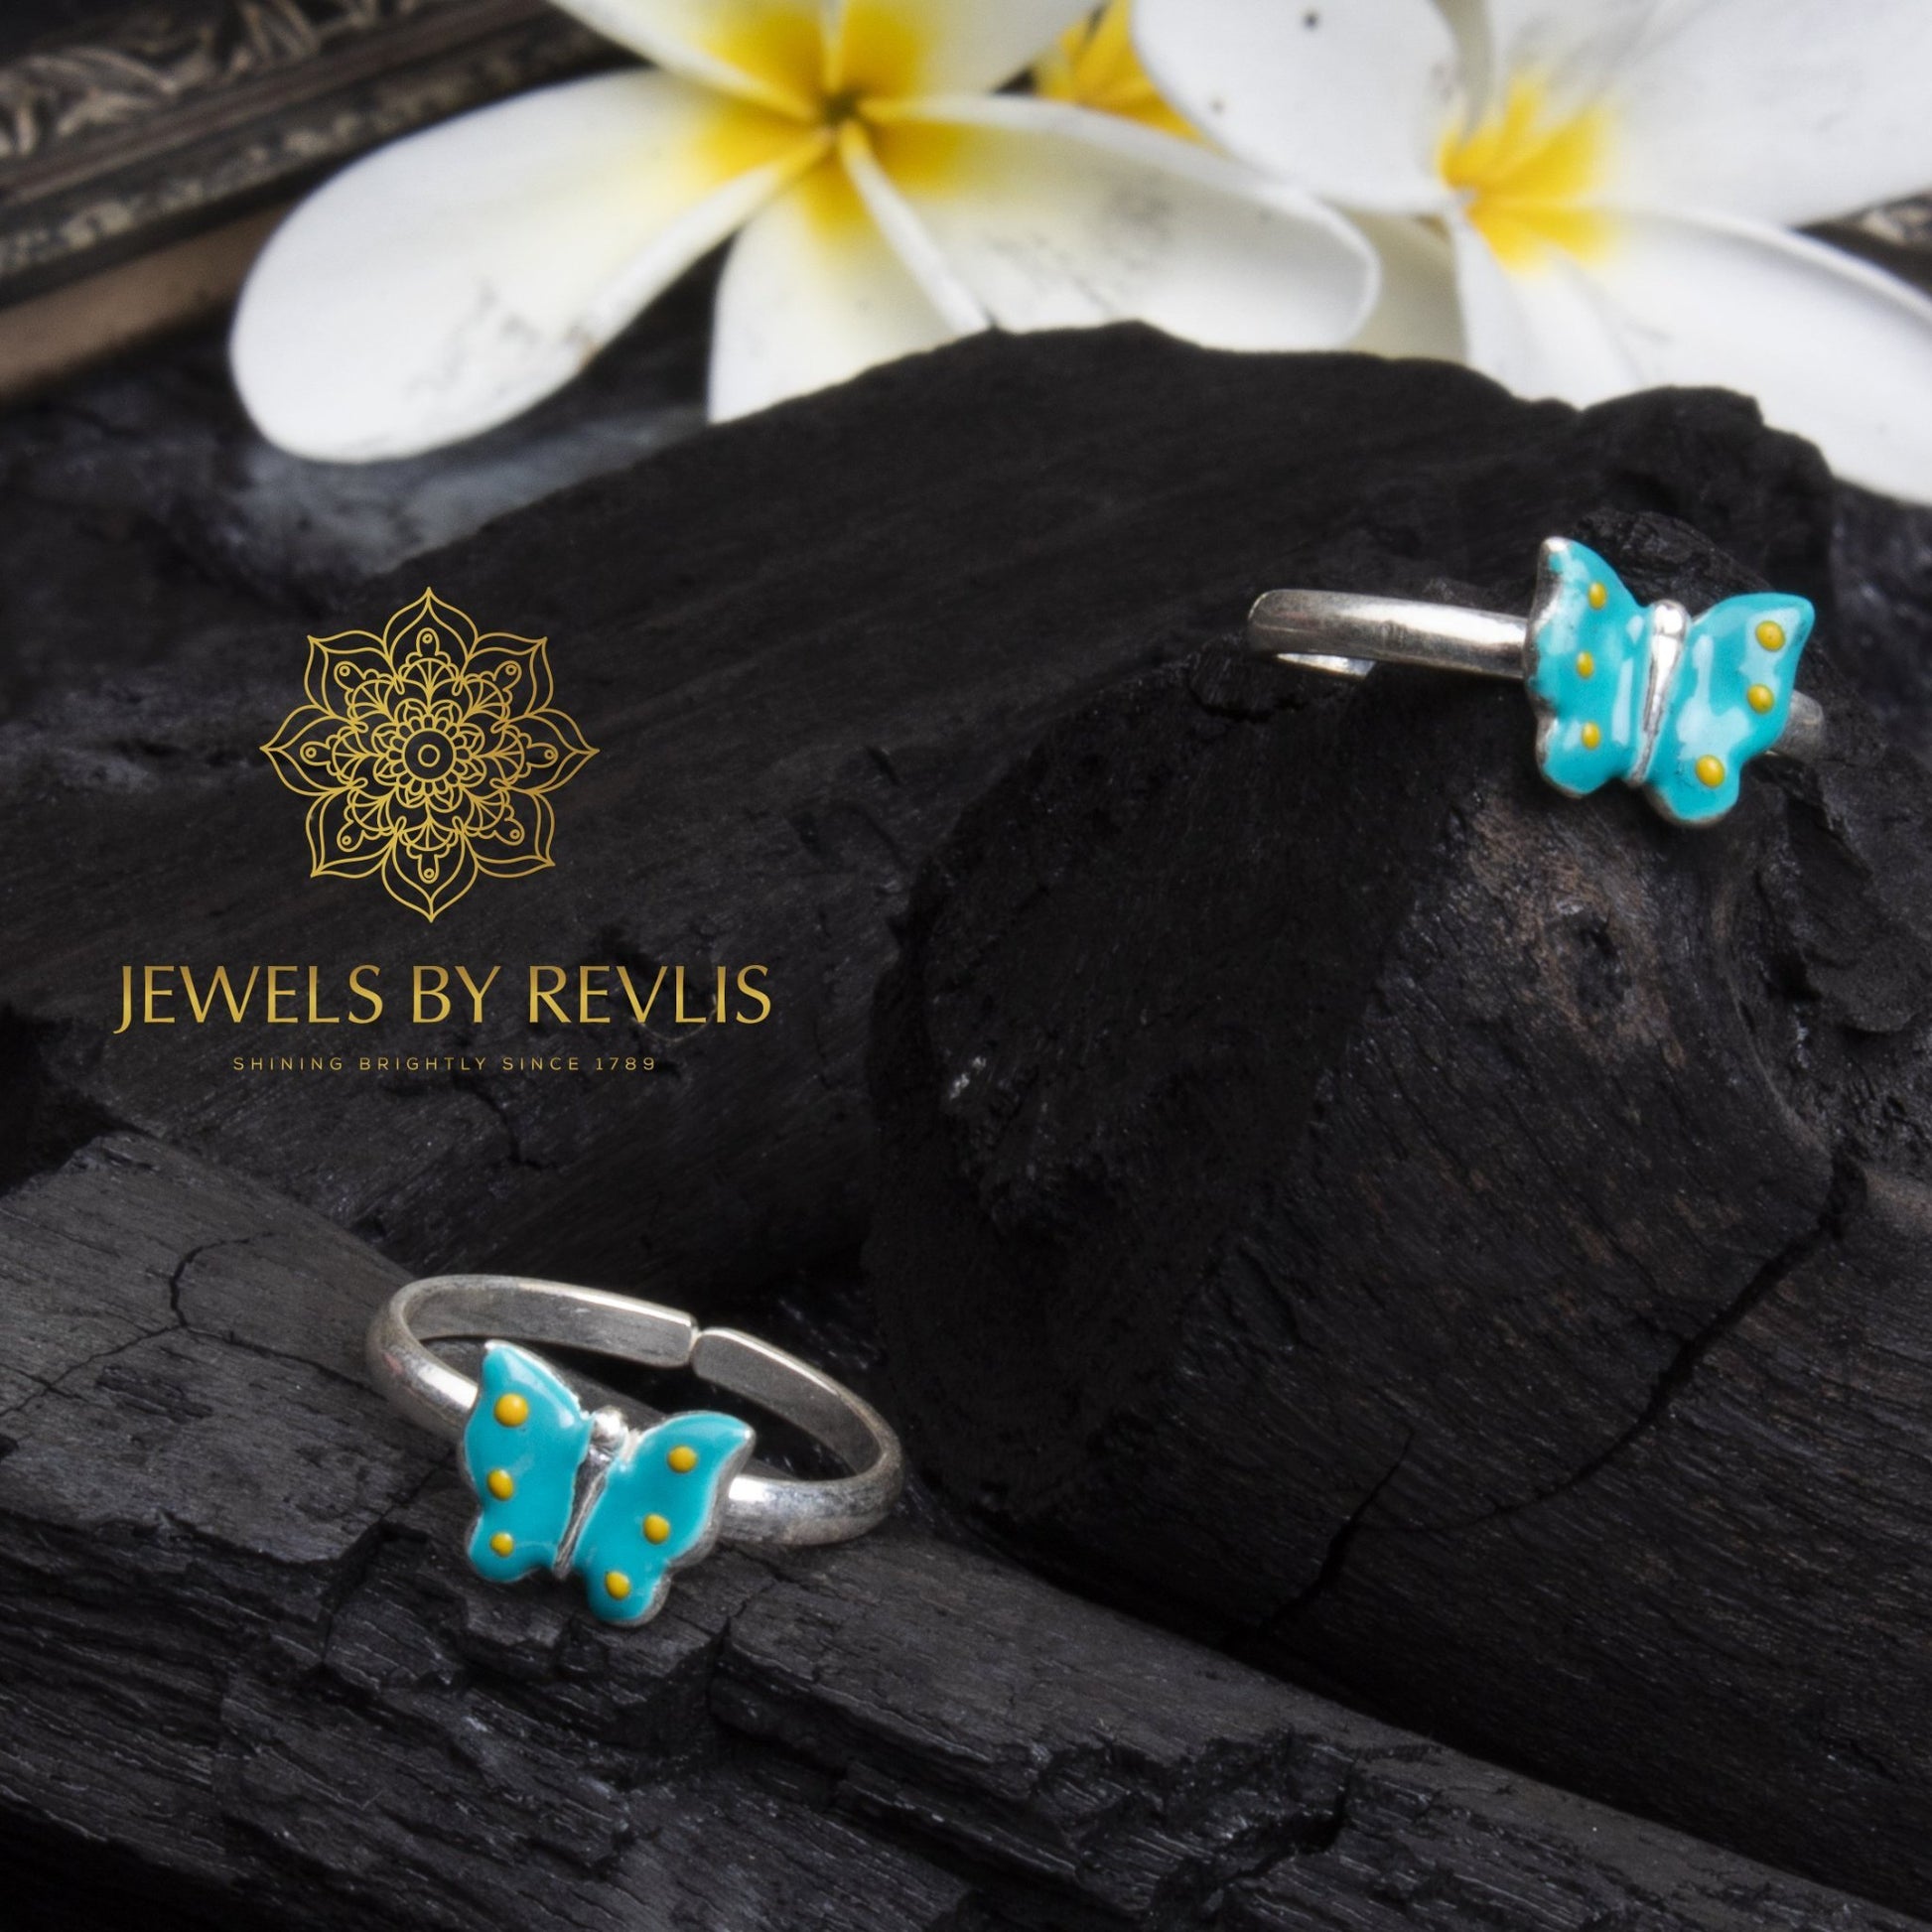 Jewels by Revlis Silver Toe Rings